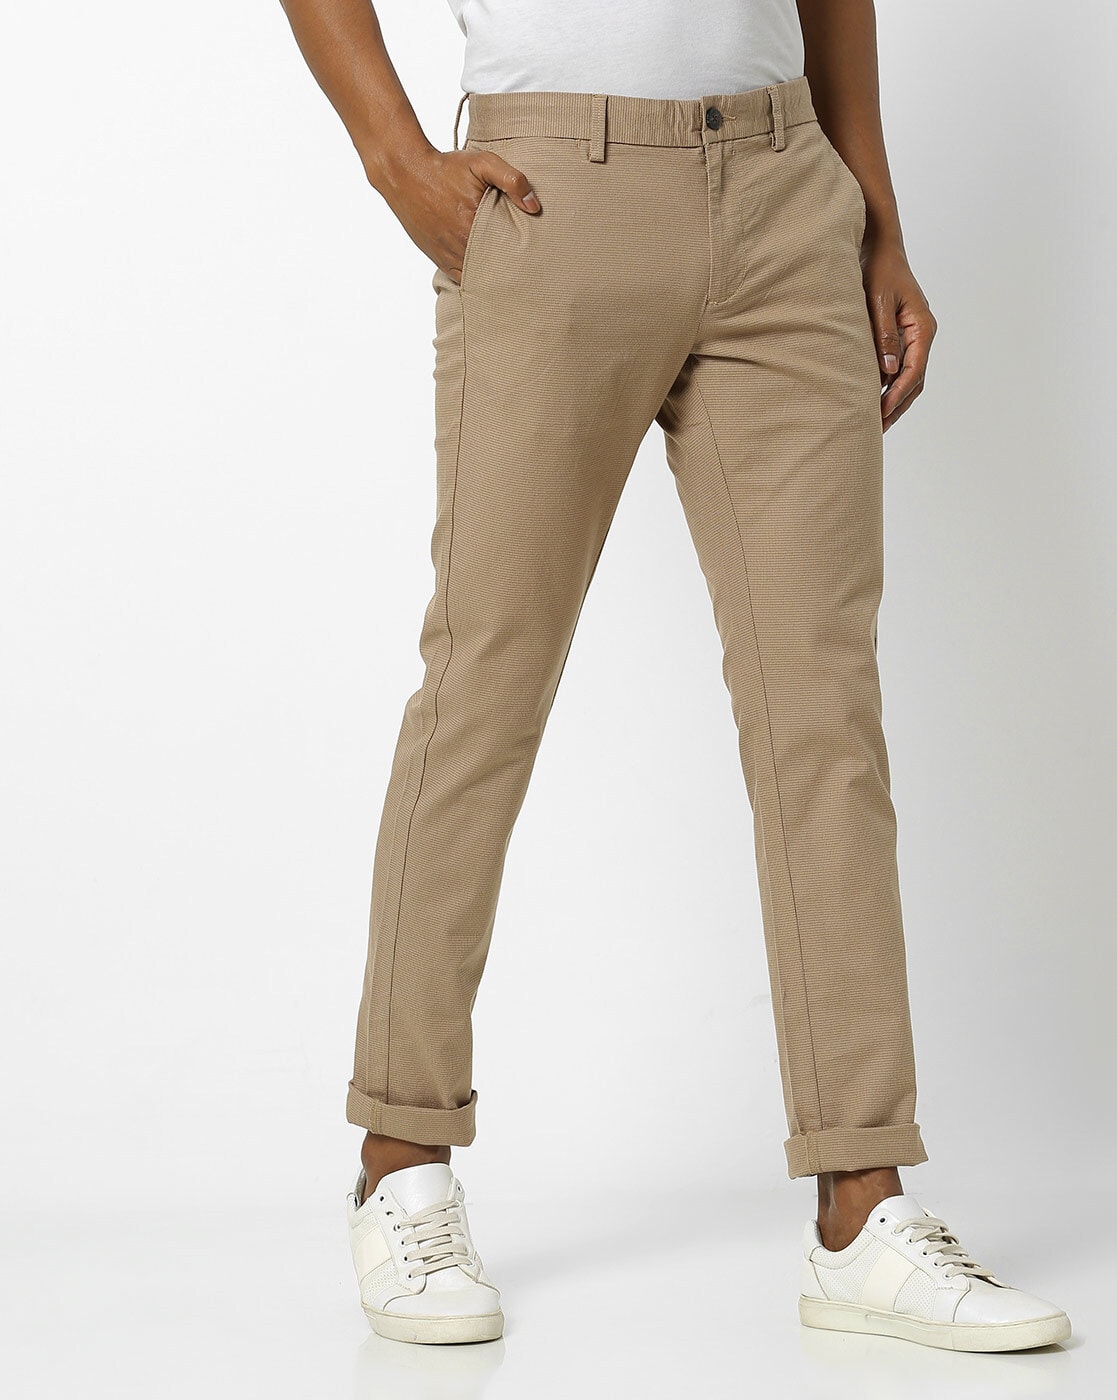 The Indian Garage Co Men Solid Slim Fit Chinos Trousers - Price History